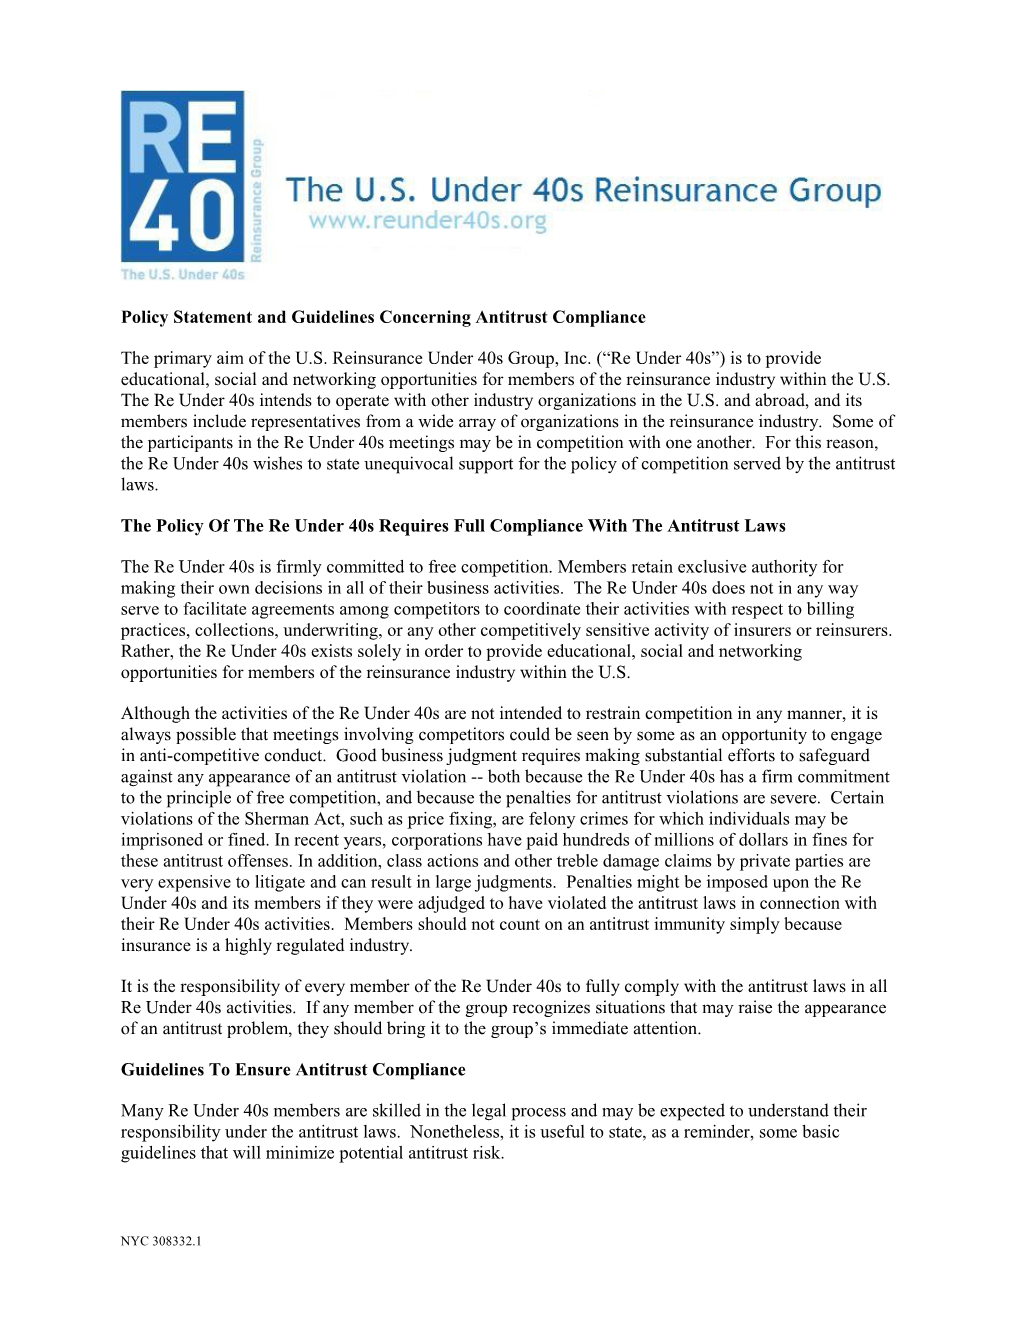 Policy Statement and Guidelines Concerning Antitrust Compliance